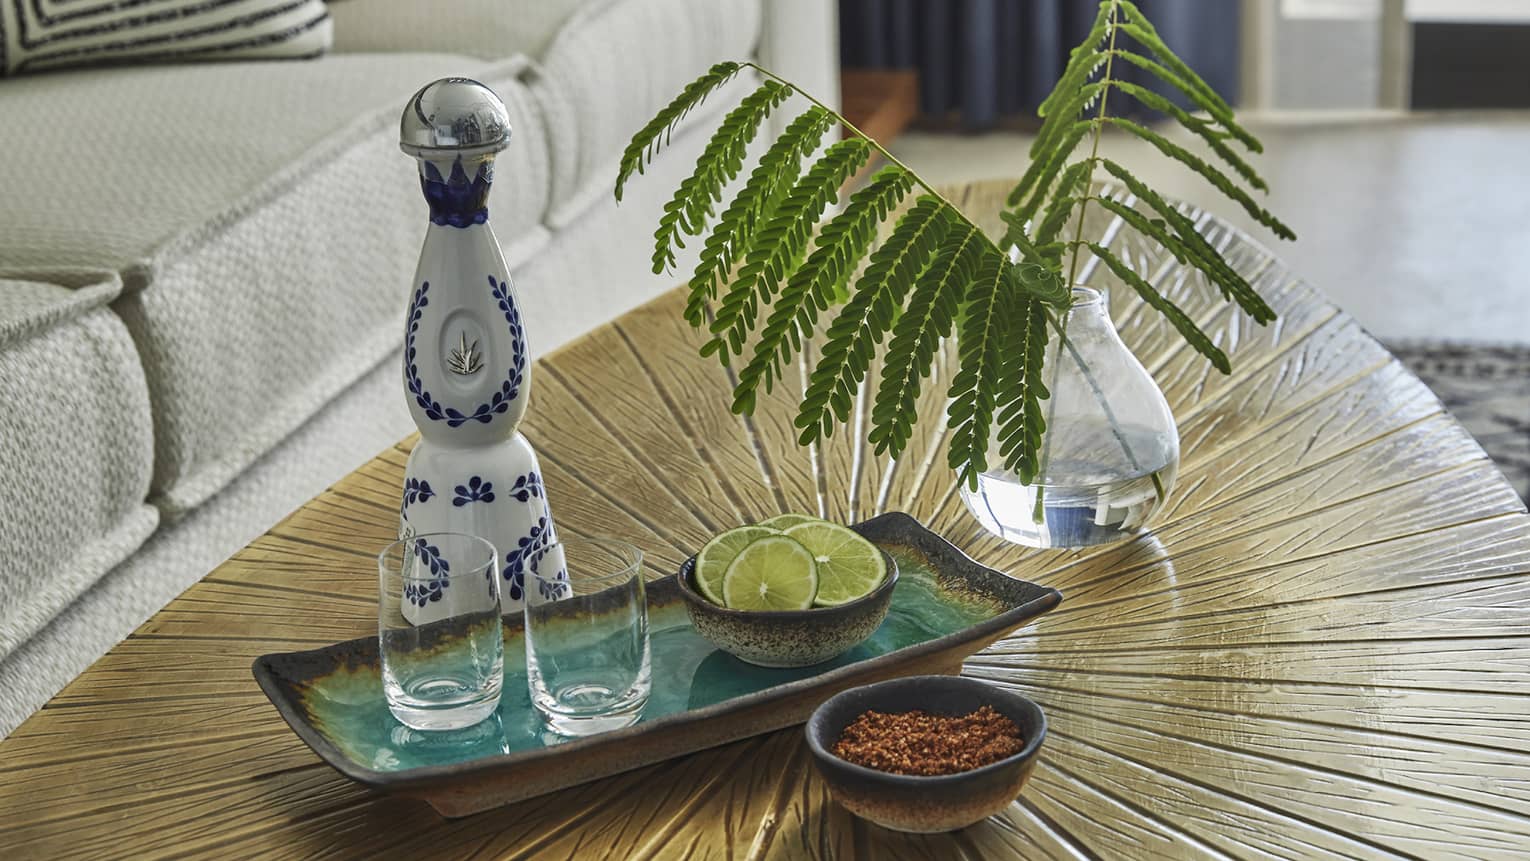 A coffee table with small glasses, a blue and white bottle and spices.